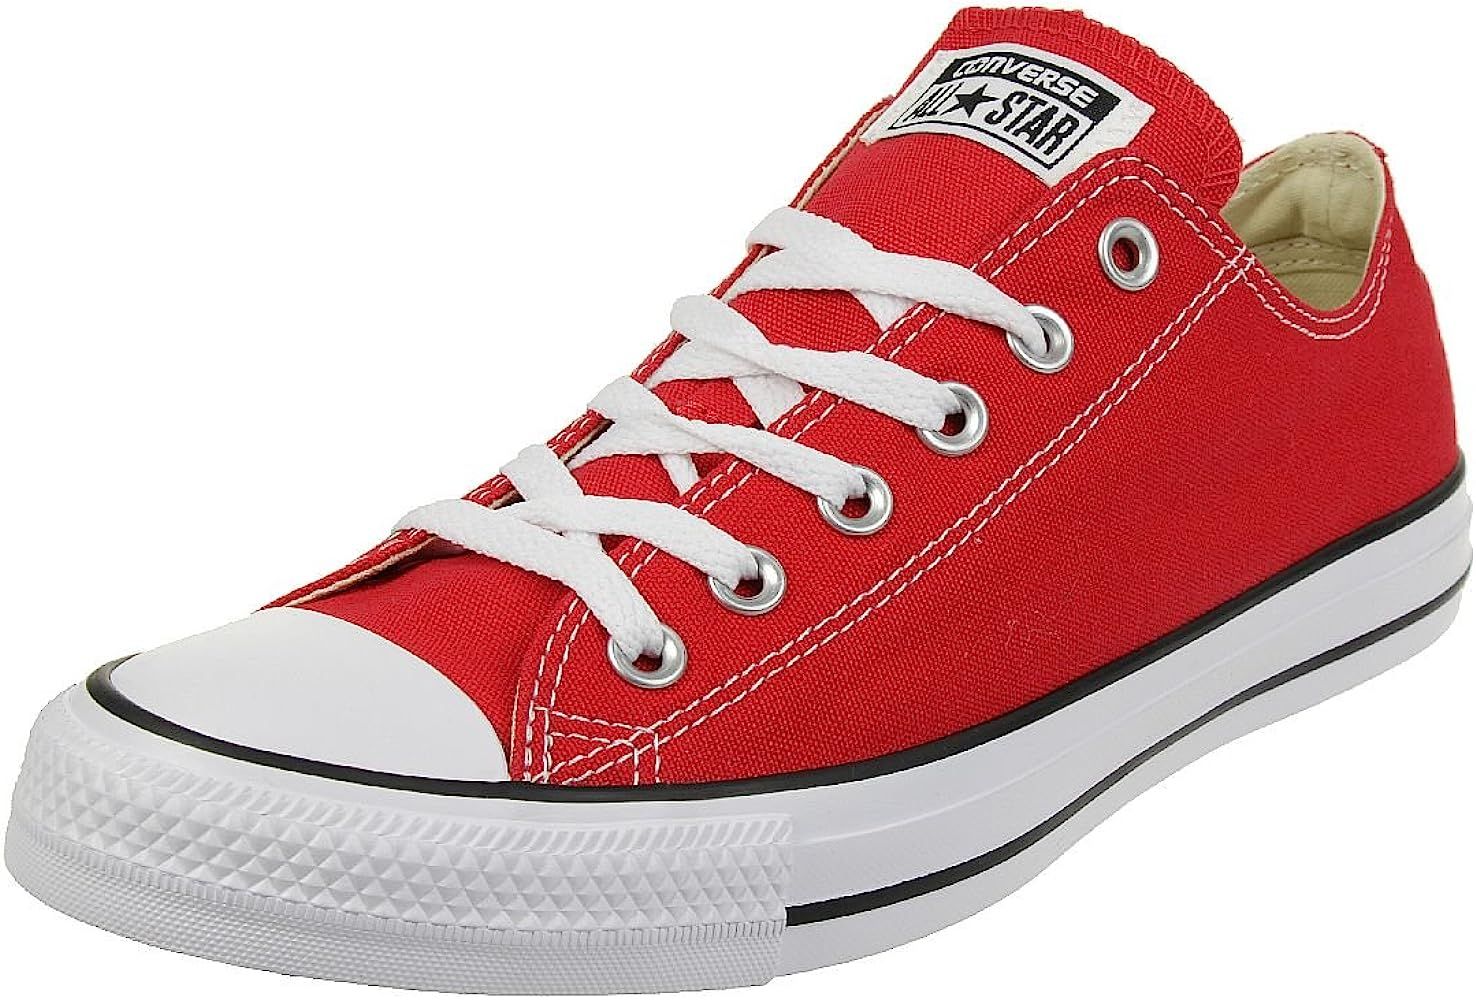 Converse Women's Chuck Taylor All Star Sneakers | Amazon (US)